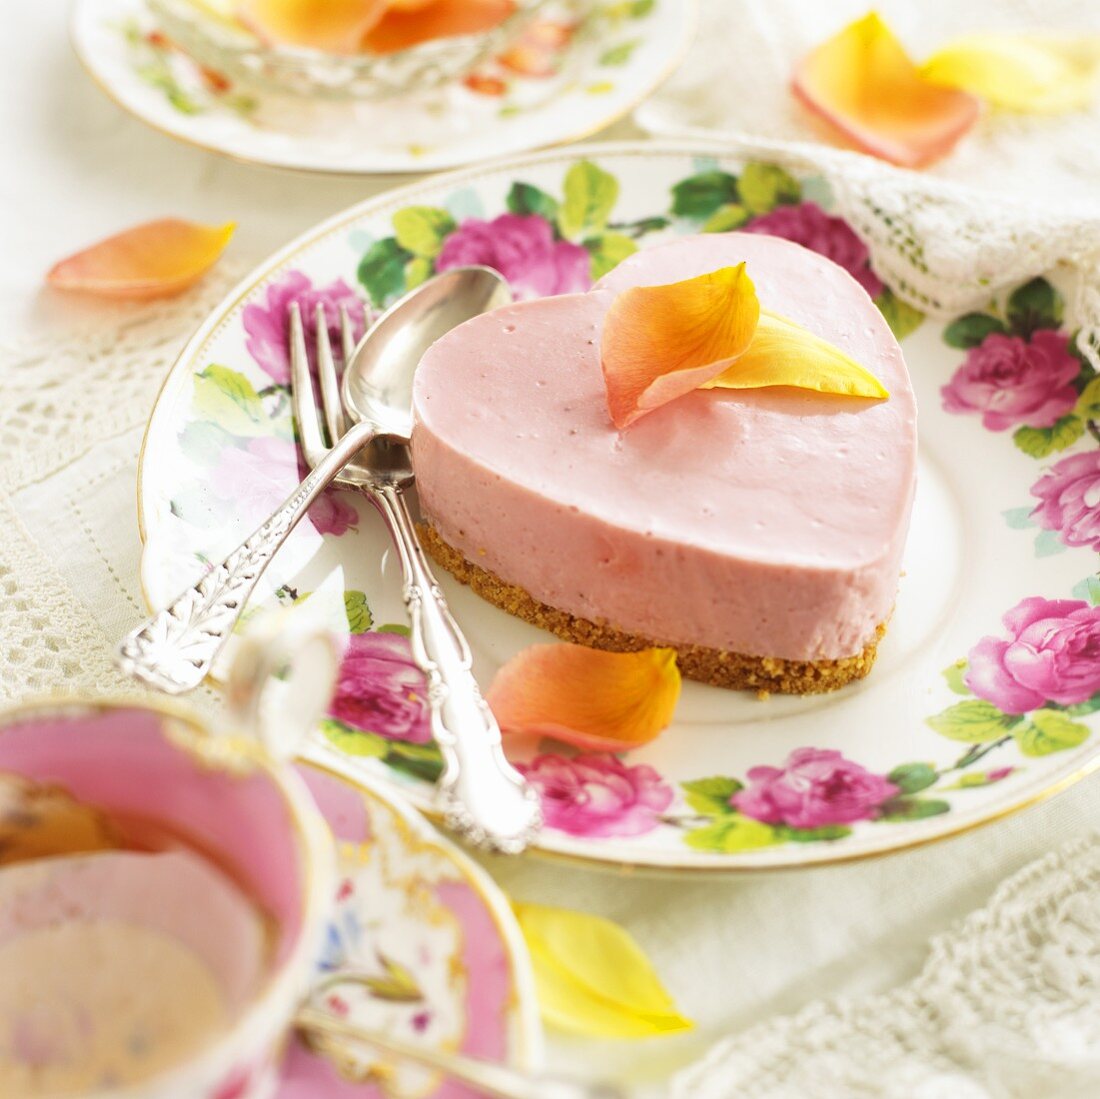 Heart-shaped pink cheesecake with rose petals